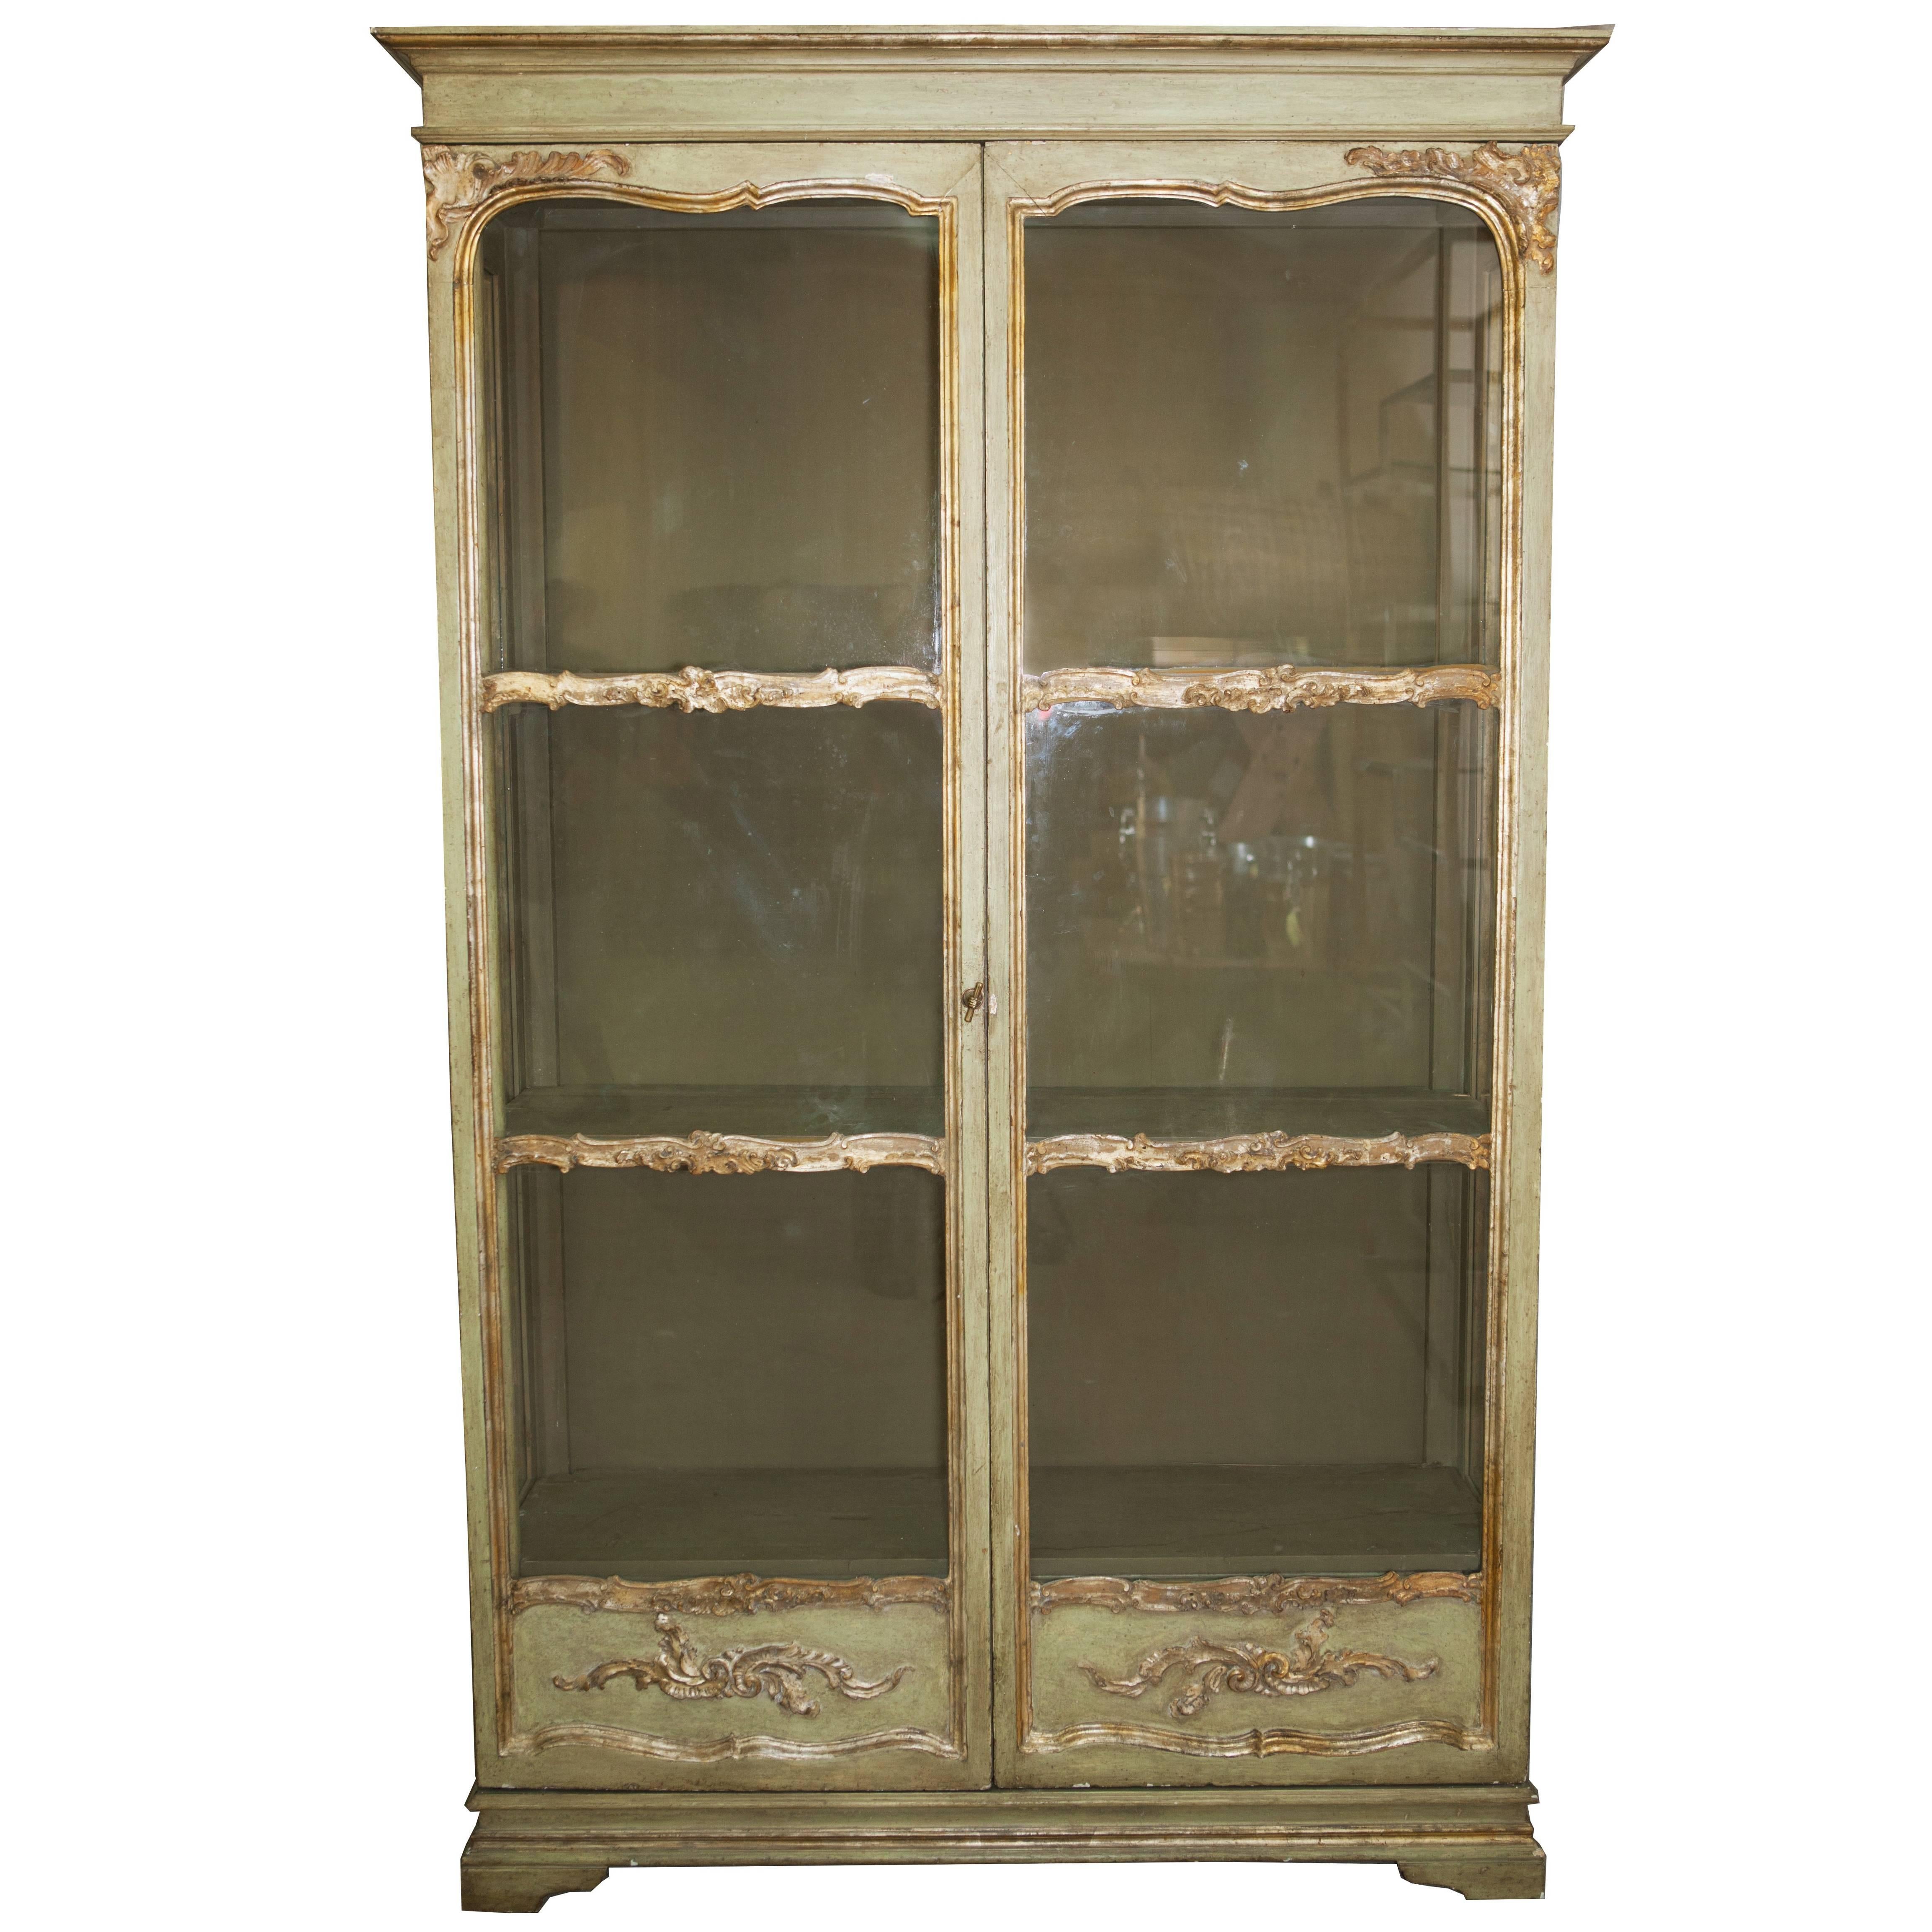 Italian Soft Green Painted Bookcase with Glass Doors from the Mid 19th Century